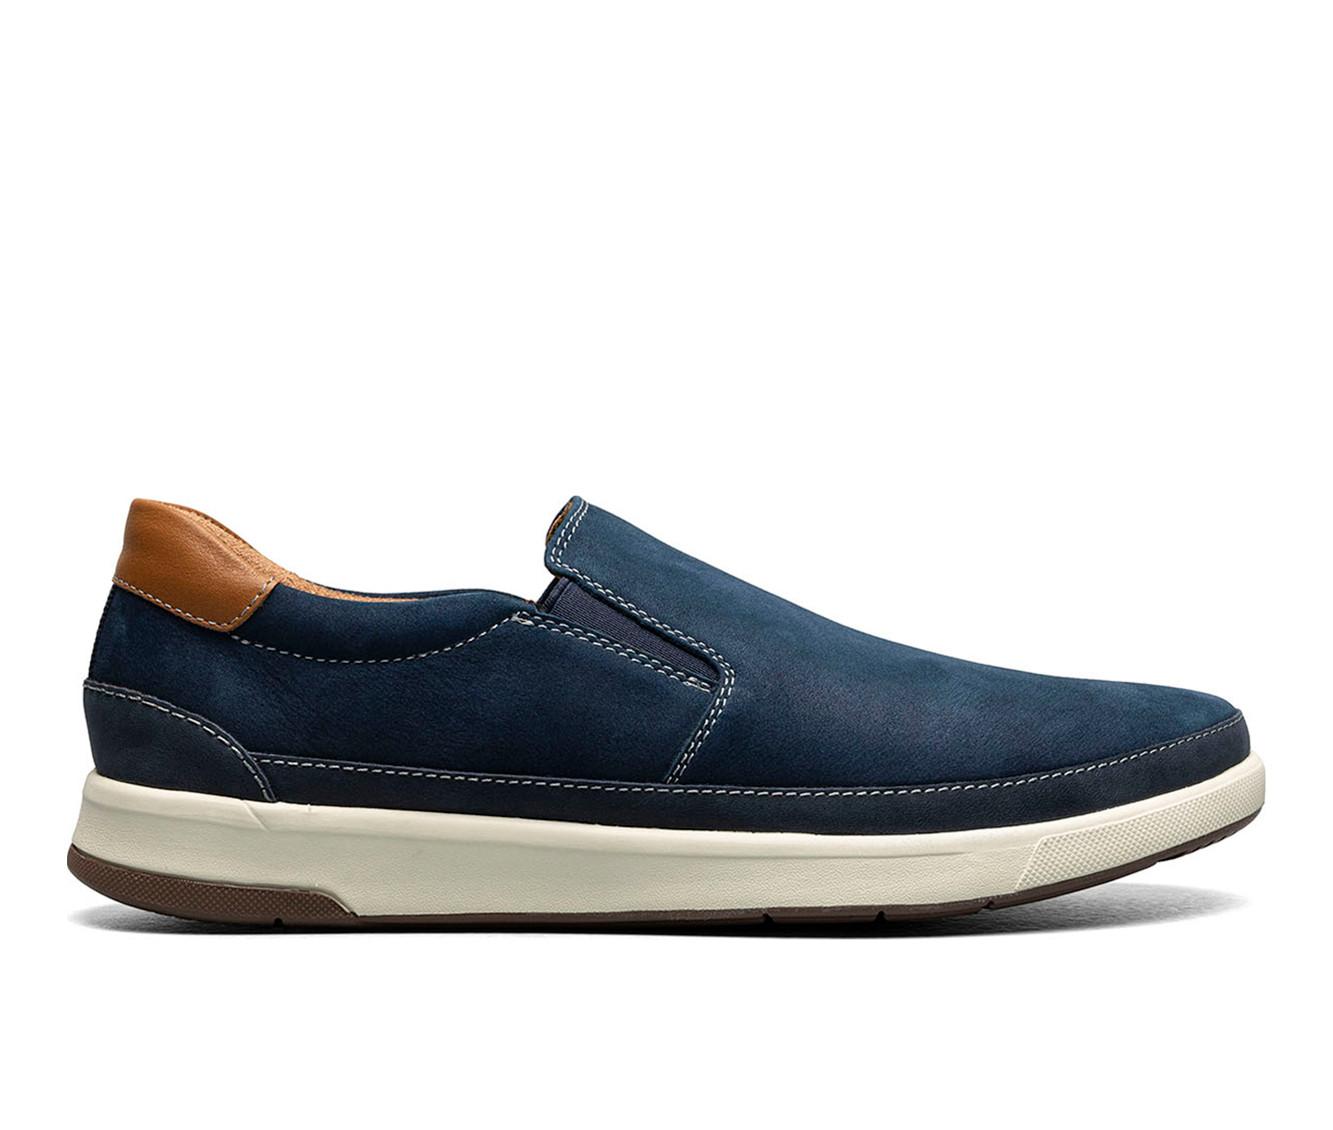 Men's Florsheim Crossover Double Gore Slip On Casual Loafers